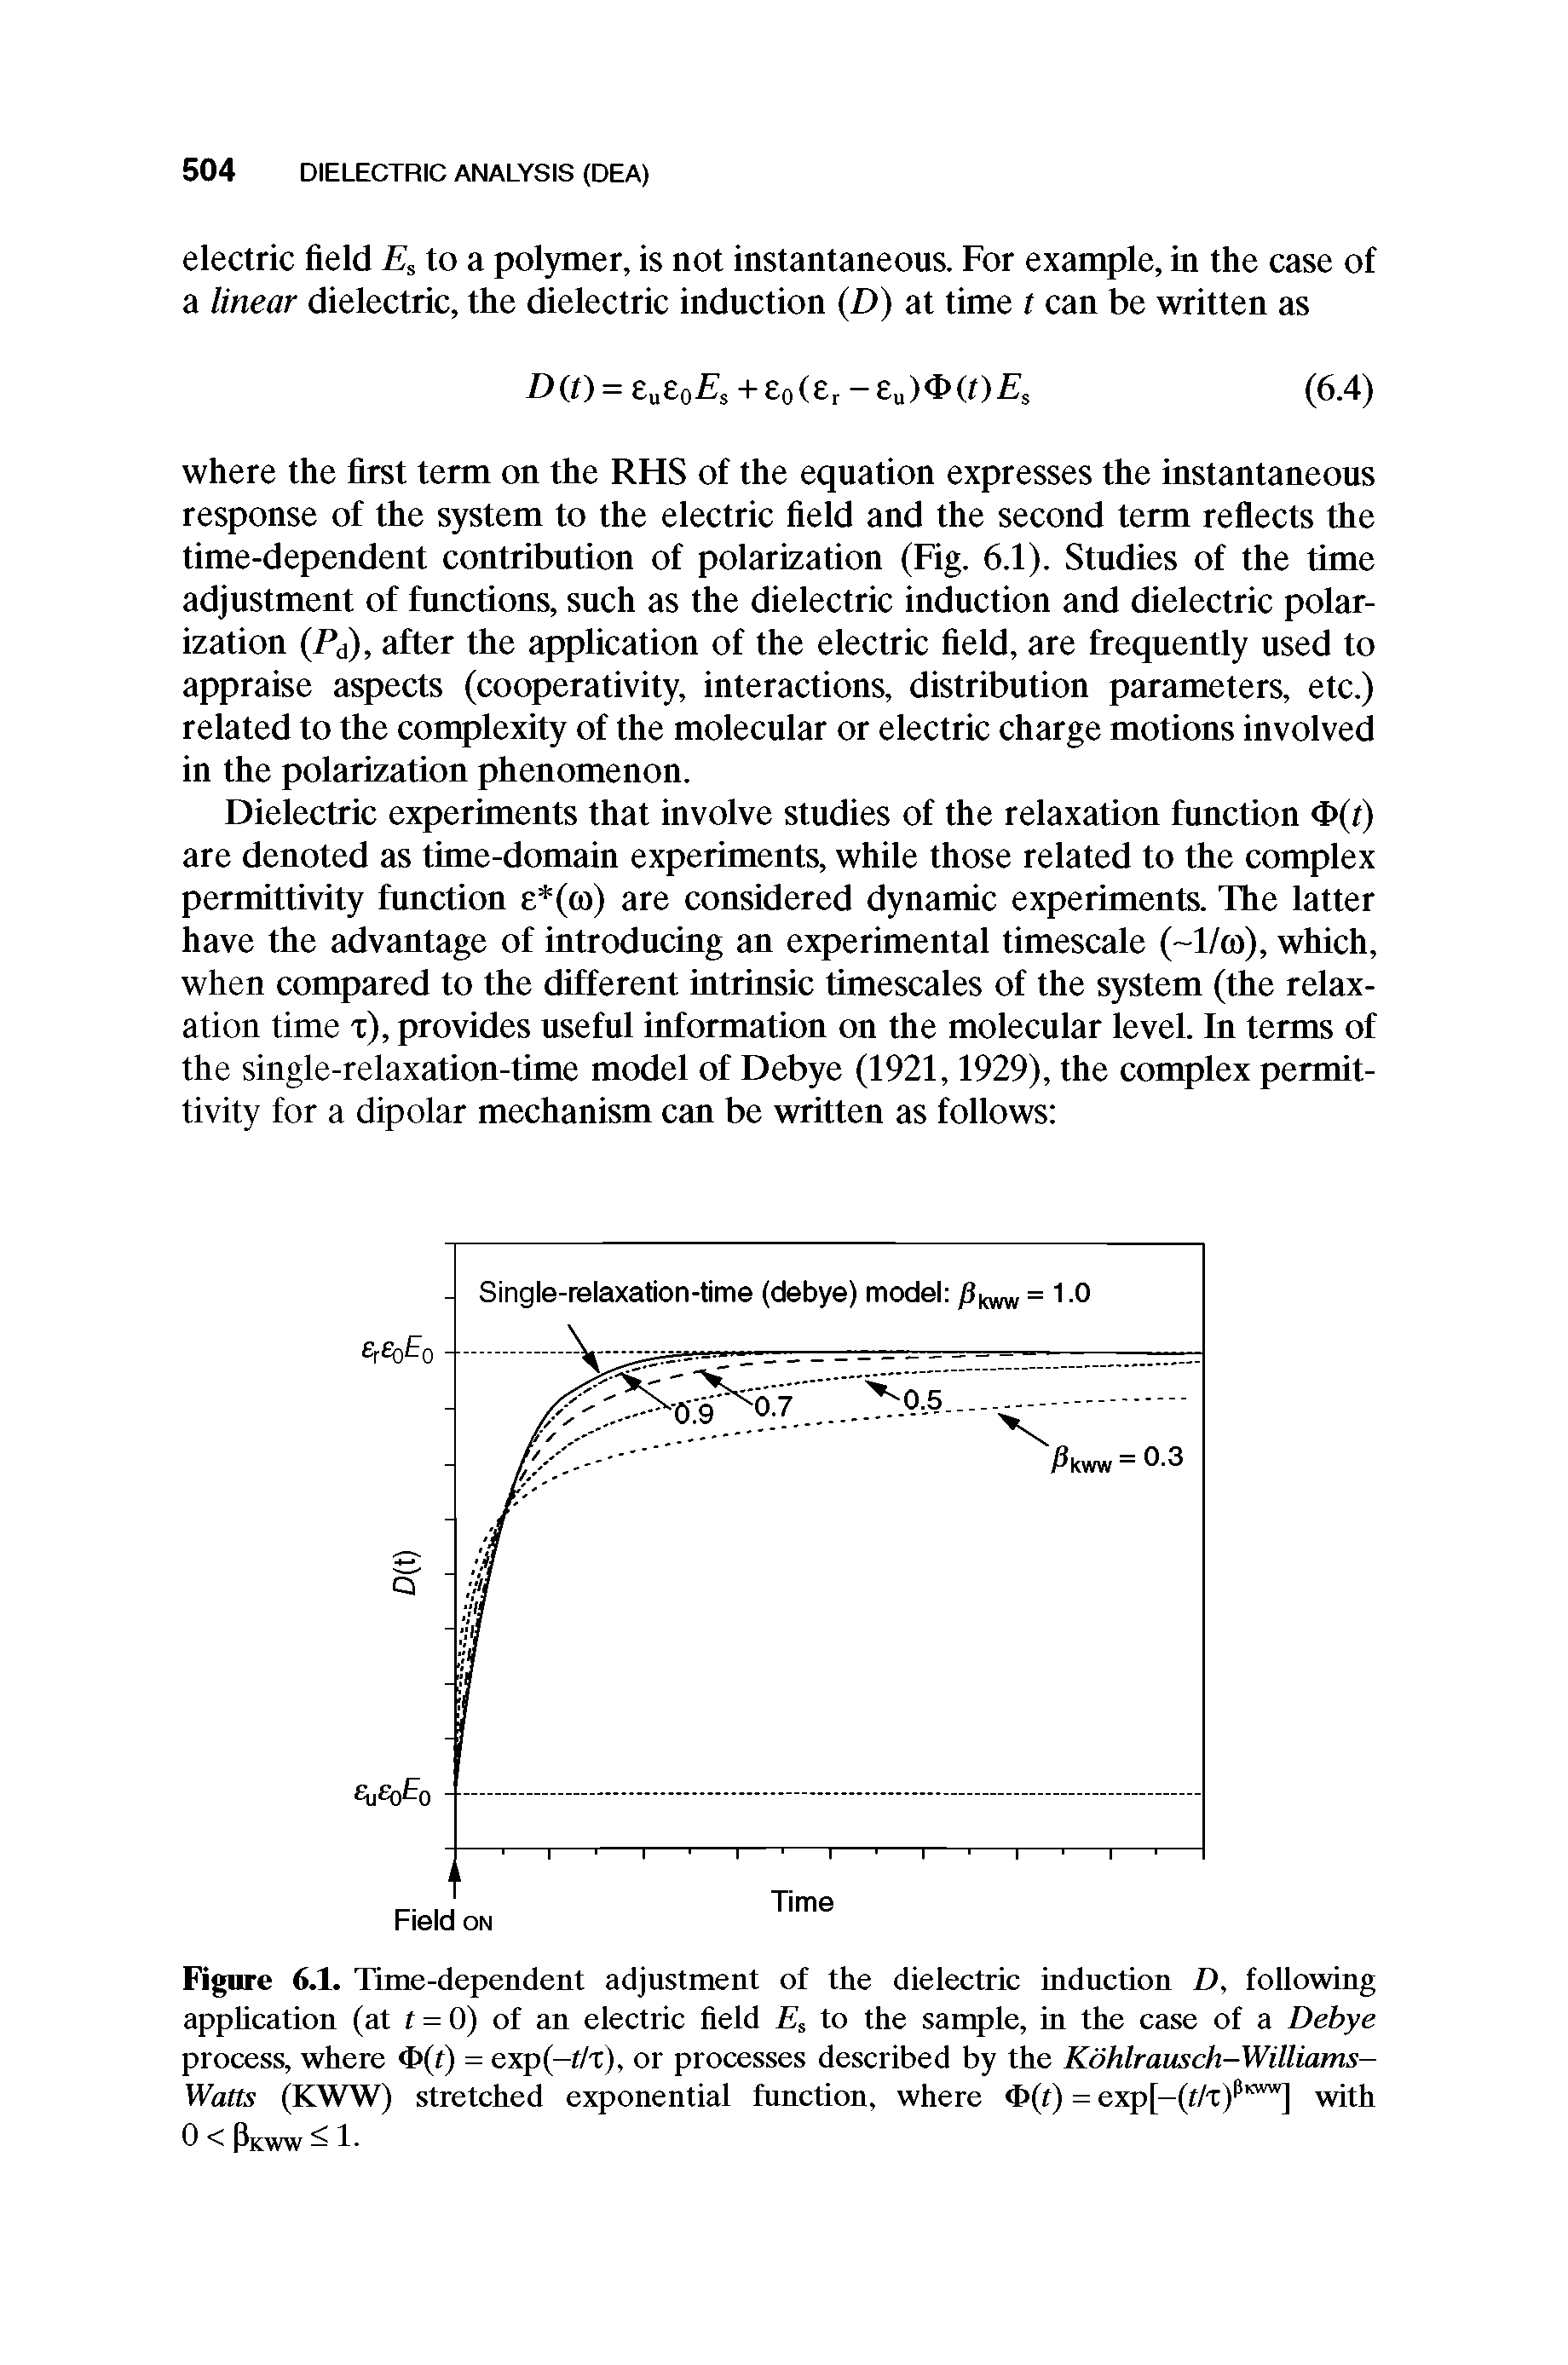 Figure 6.1. Time-dependent adjustment of the dielectric induction D, following application (at f = 0) of an electric field Es to the sample, in the case of a Debye process, where <I>(f) = exp(-f/x), or processes described by the Kdhlrausch-Williams-Watts (KWW) stretched exponential function, where <I>(f) = exp[-(f/x) ] with 0 < Pkww 1-...